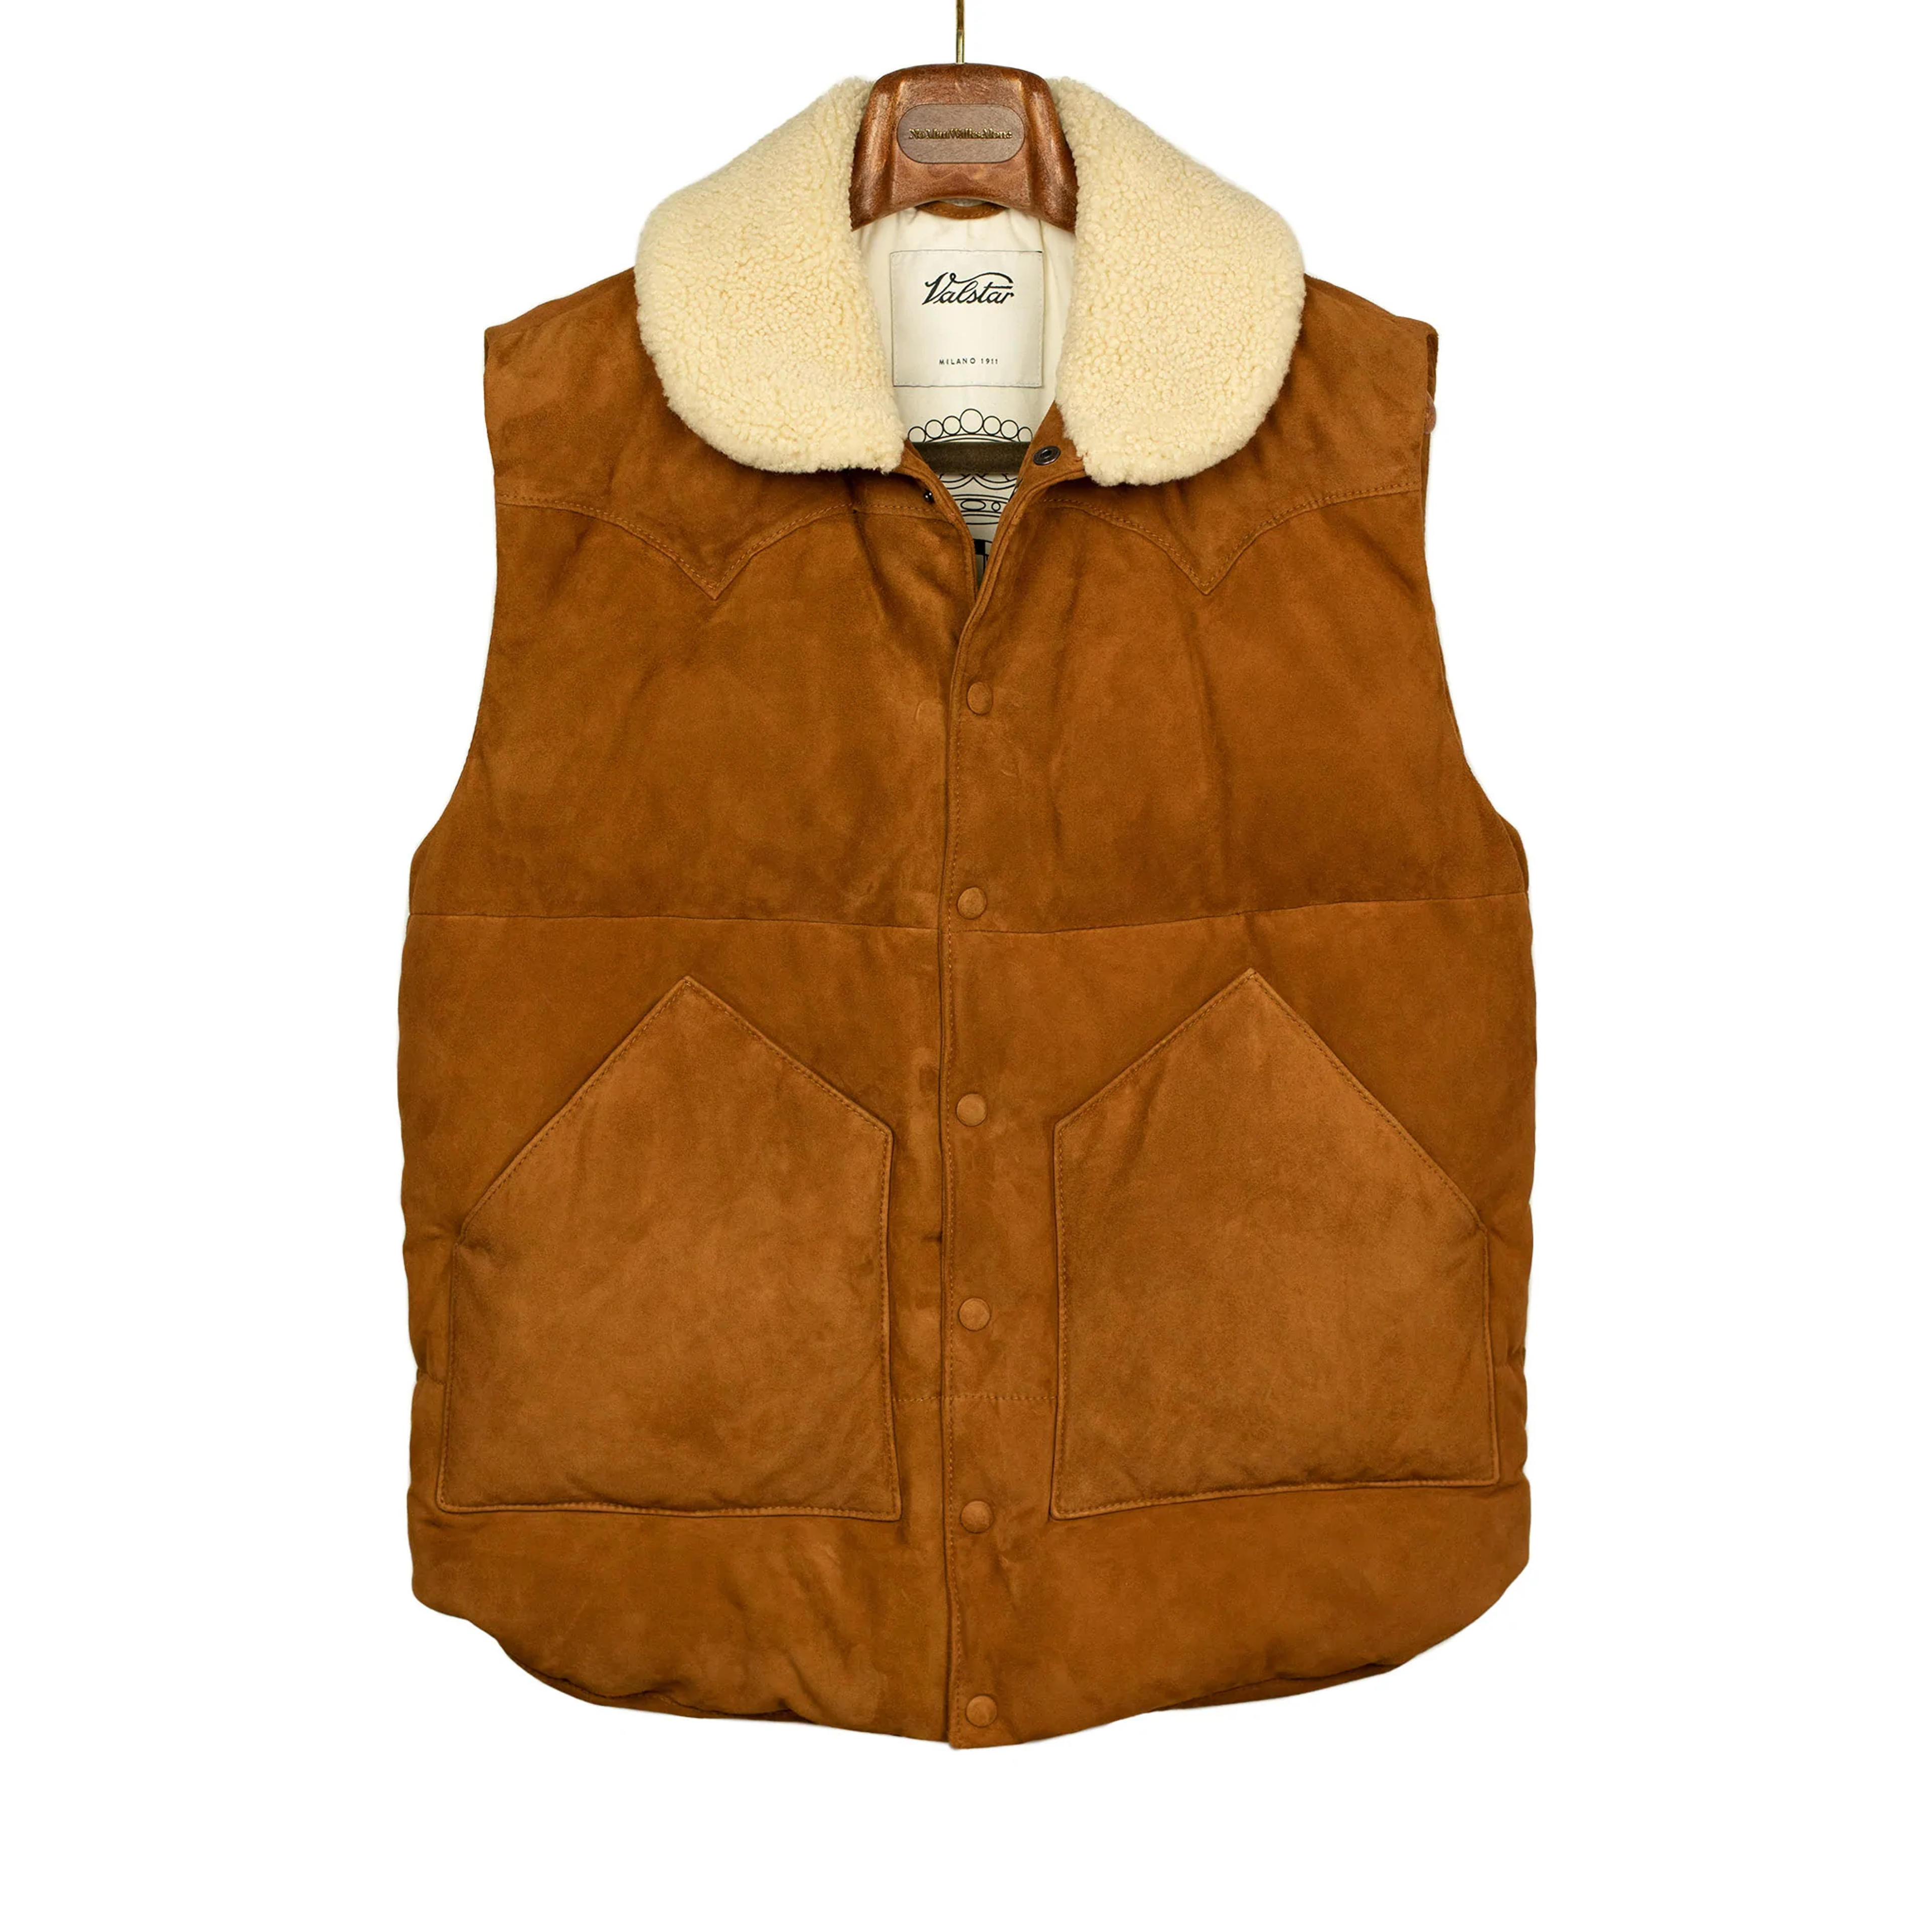 Down-filled vest in tan suede - 46